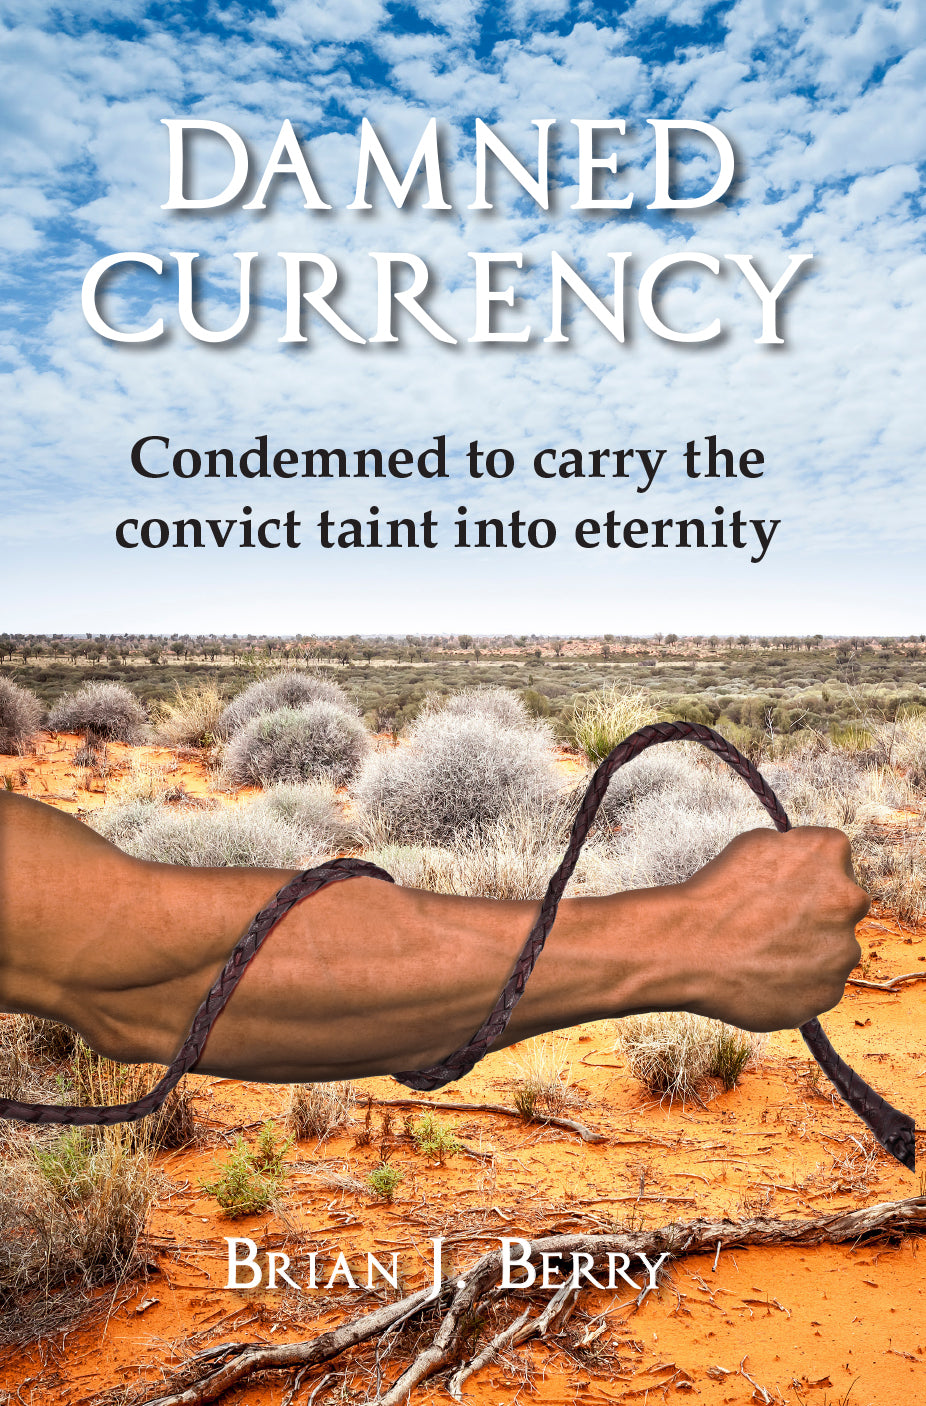 Damned Currency: Condemned to carry the convict taint into eternity